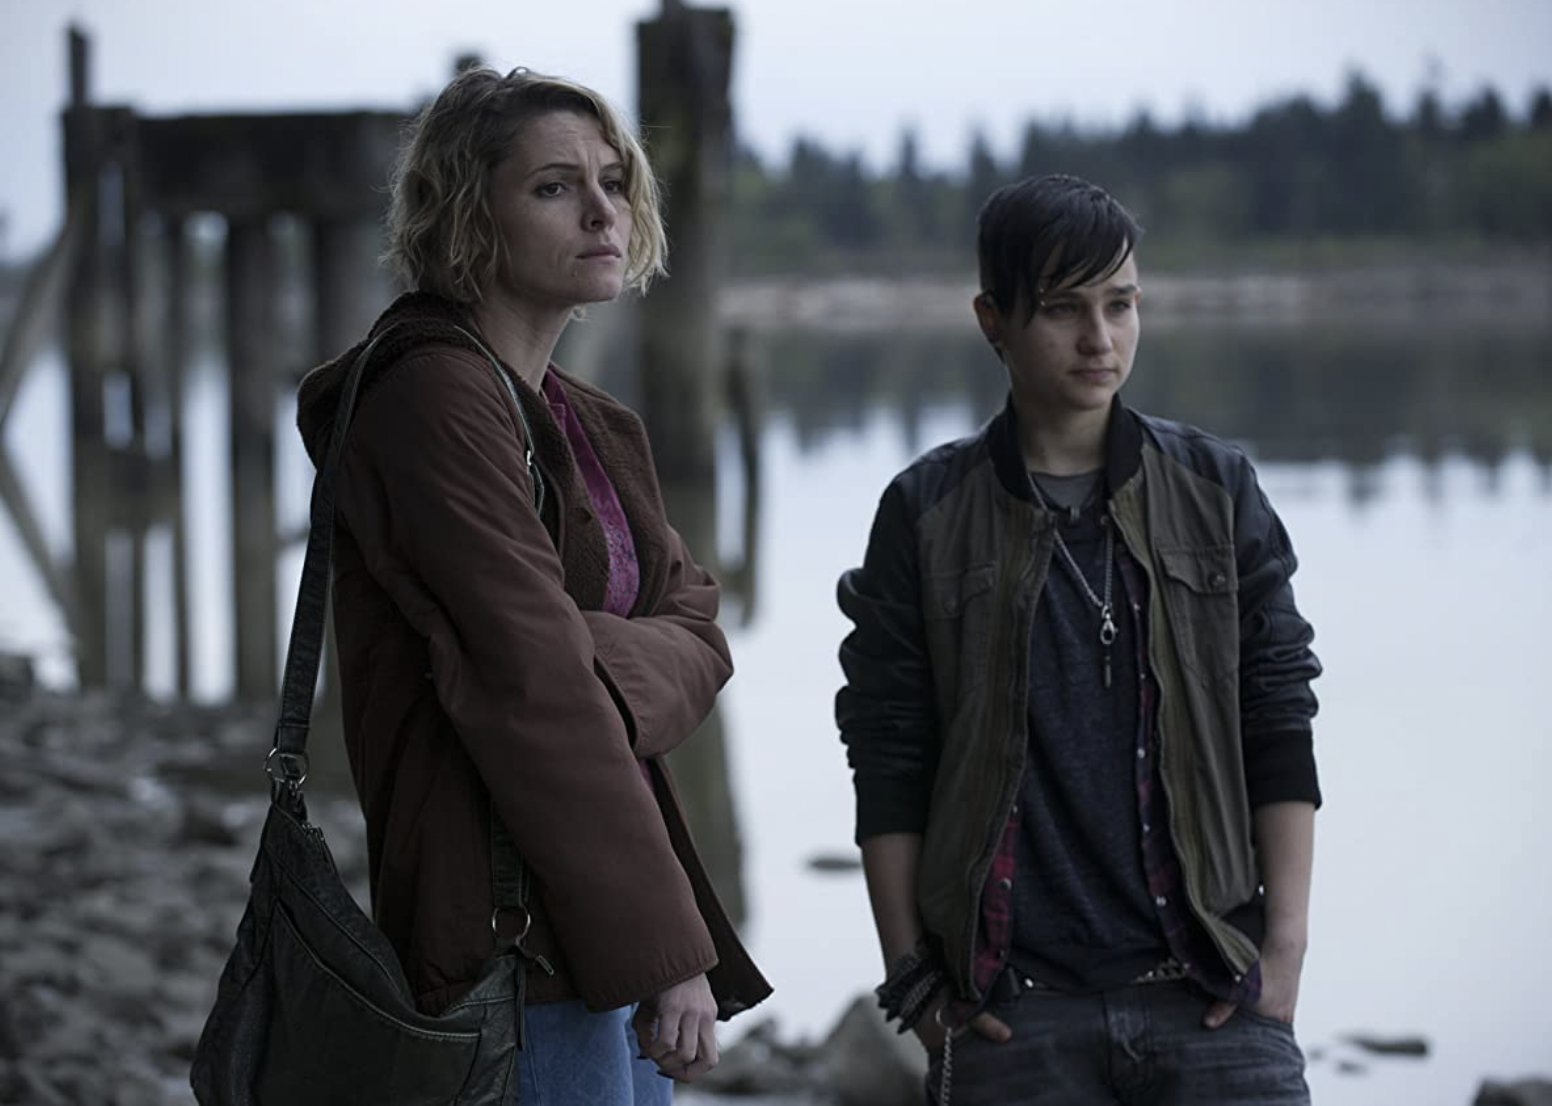 Amy Seimetz and Bex Taylor-Klaus in "The Killing".